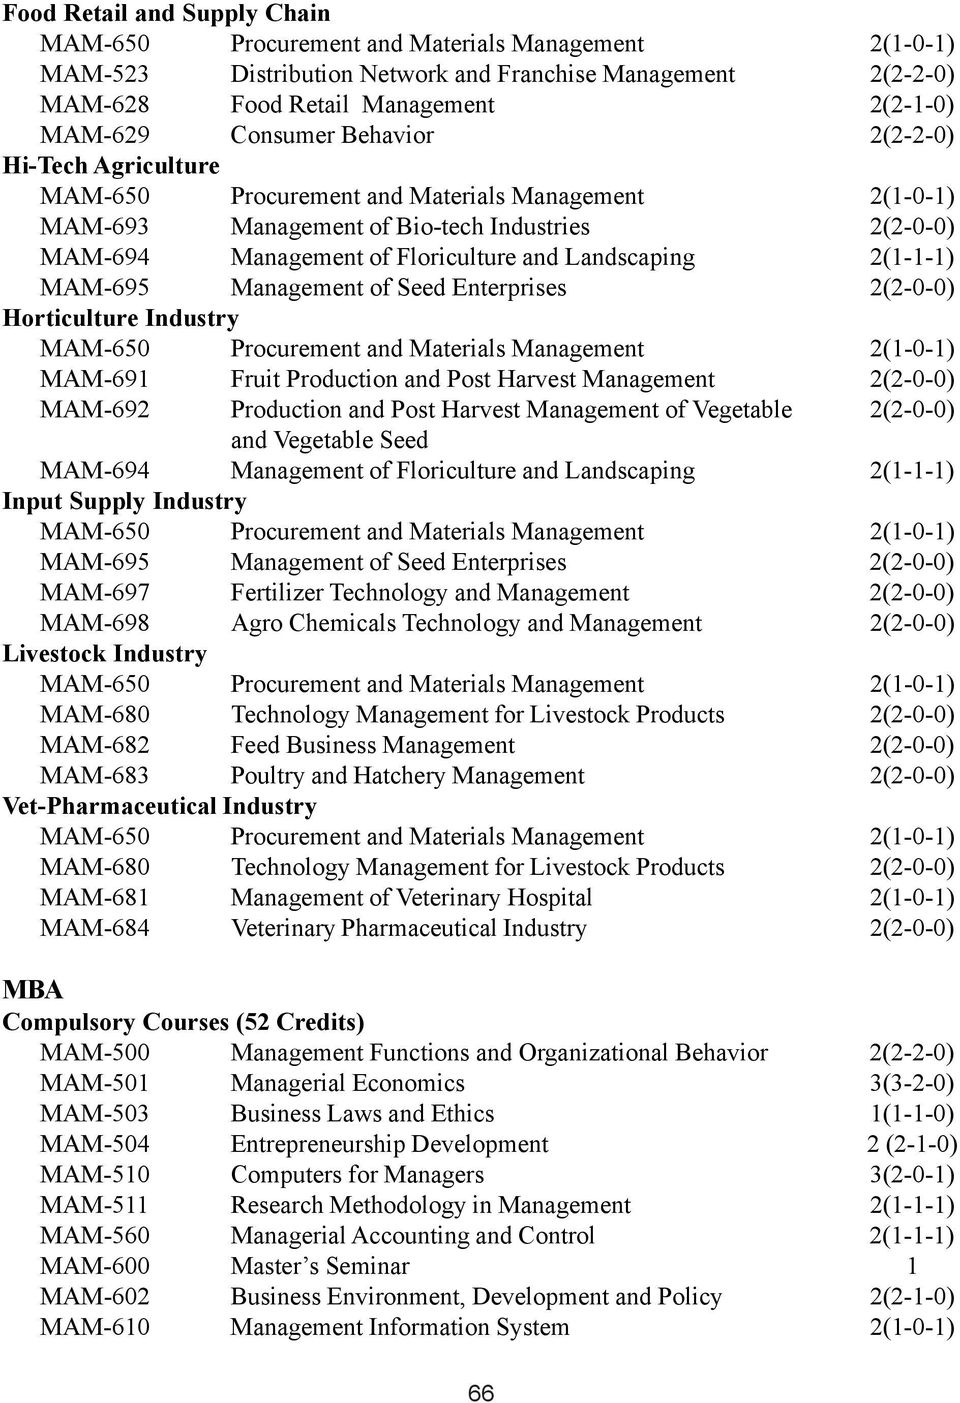 and Post Harvest Management 2(2-0-0) MAM-692 Production and Post Harvest Management of Vegetable 2(2-0-0) and Vegetable Seed MAM-694 Management of Floriculture and Landscaping 2(1-1-1) Input Supply